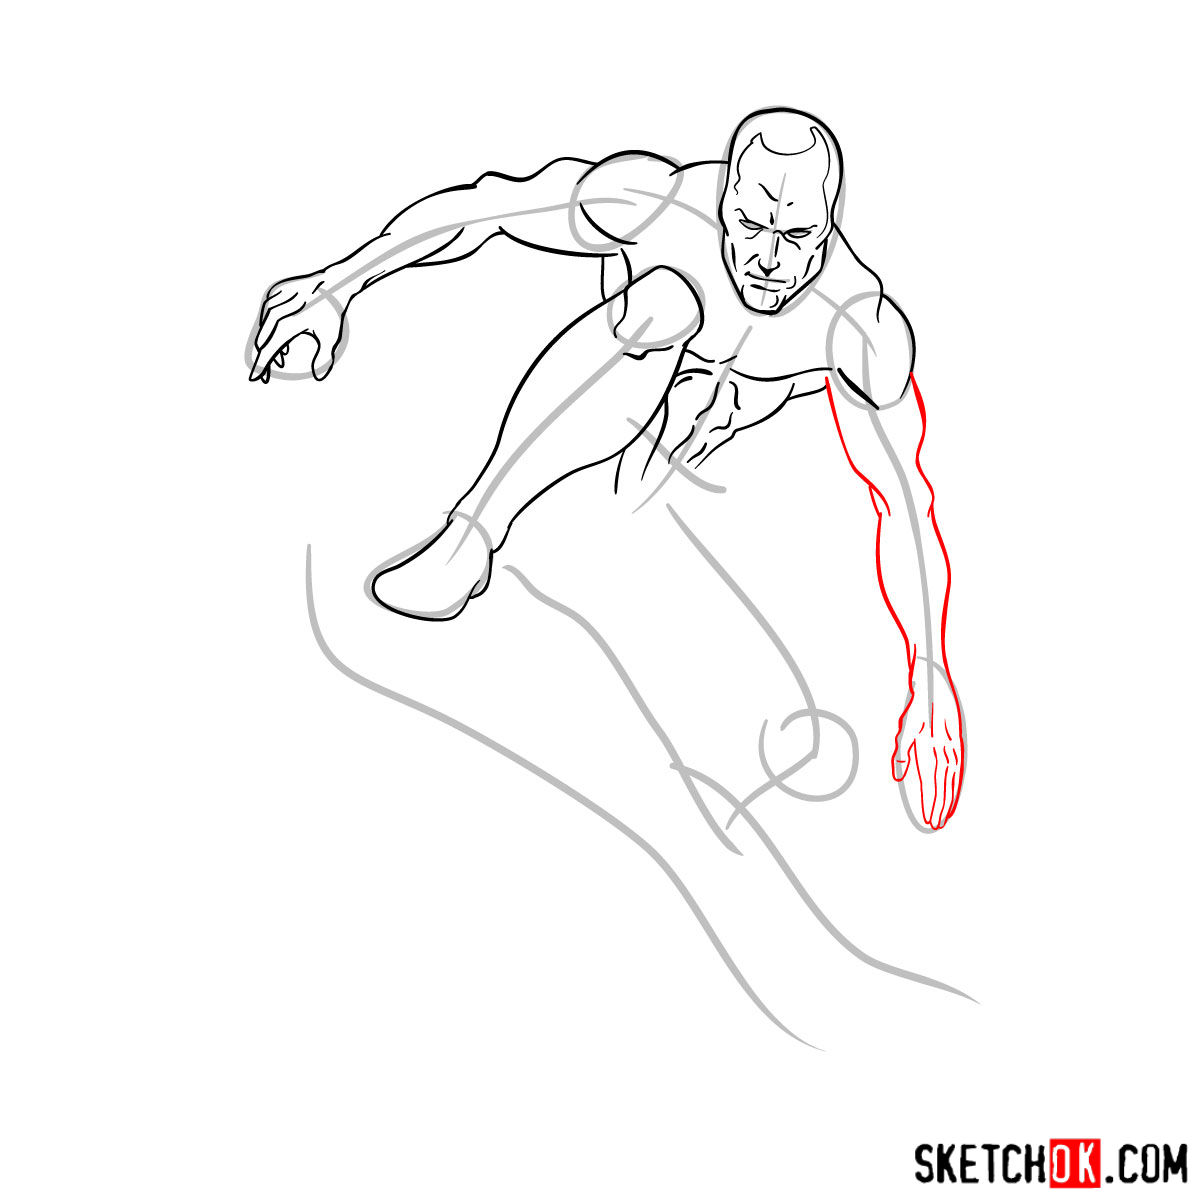 How to draw Iceman - step by step drawing tutorial - step 08